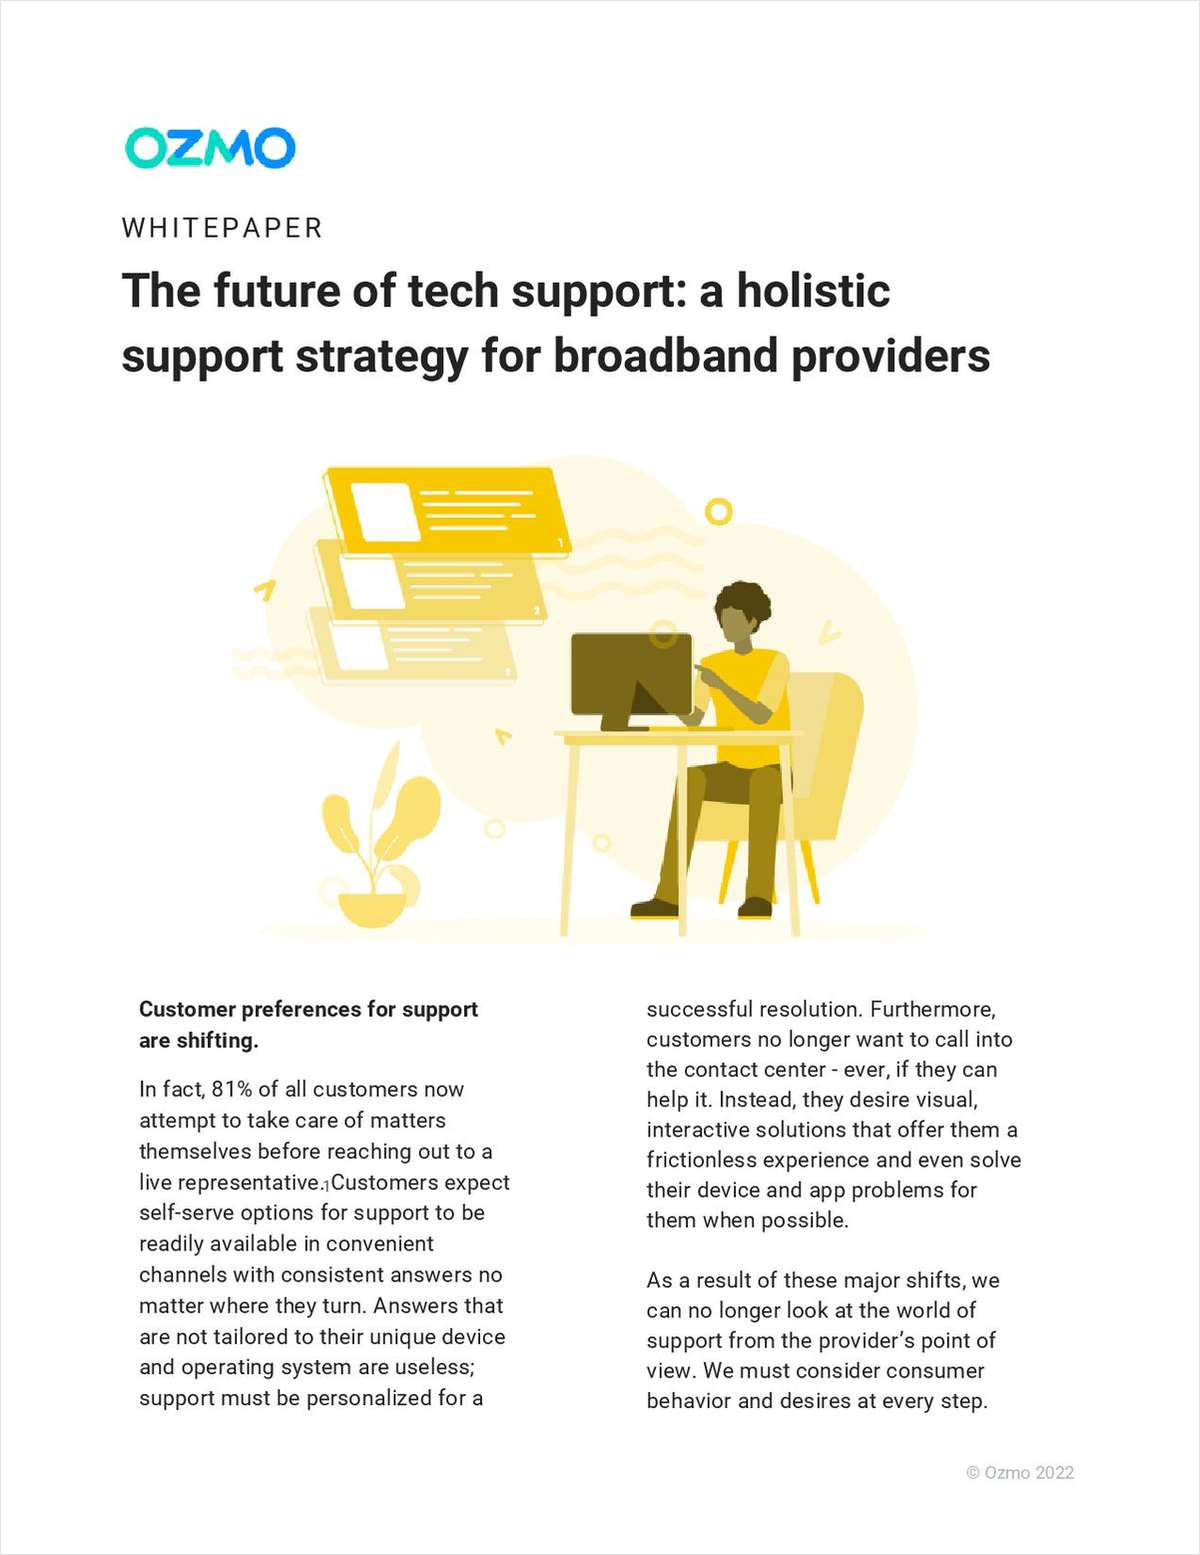 The future of tech support: a holistic support strategy for broadband providers